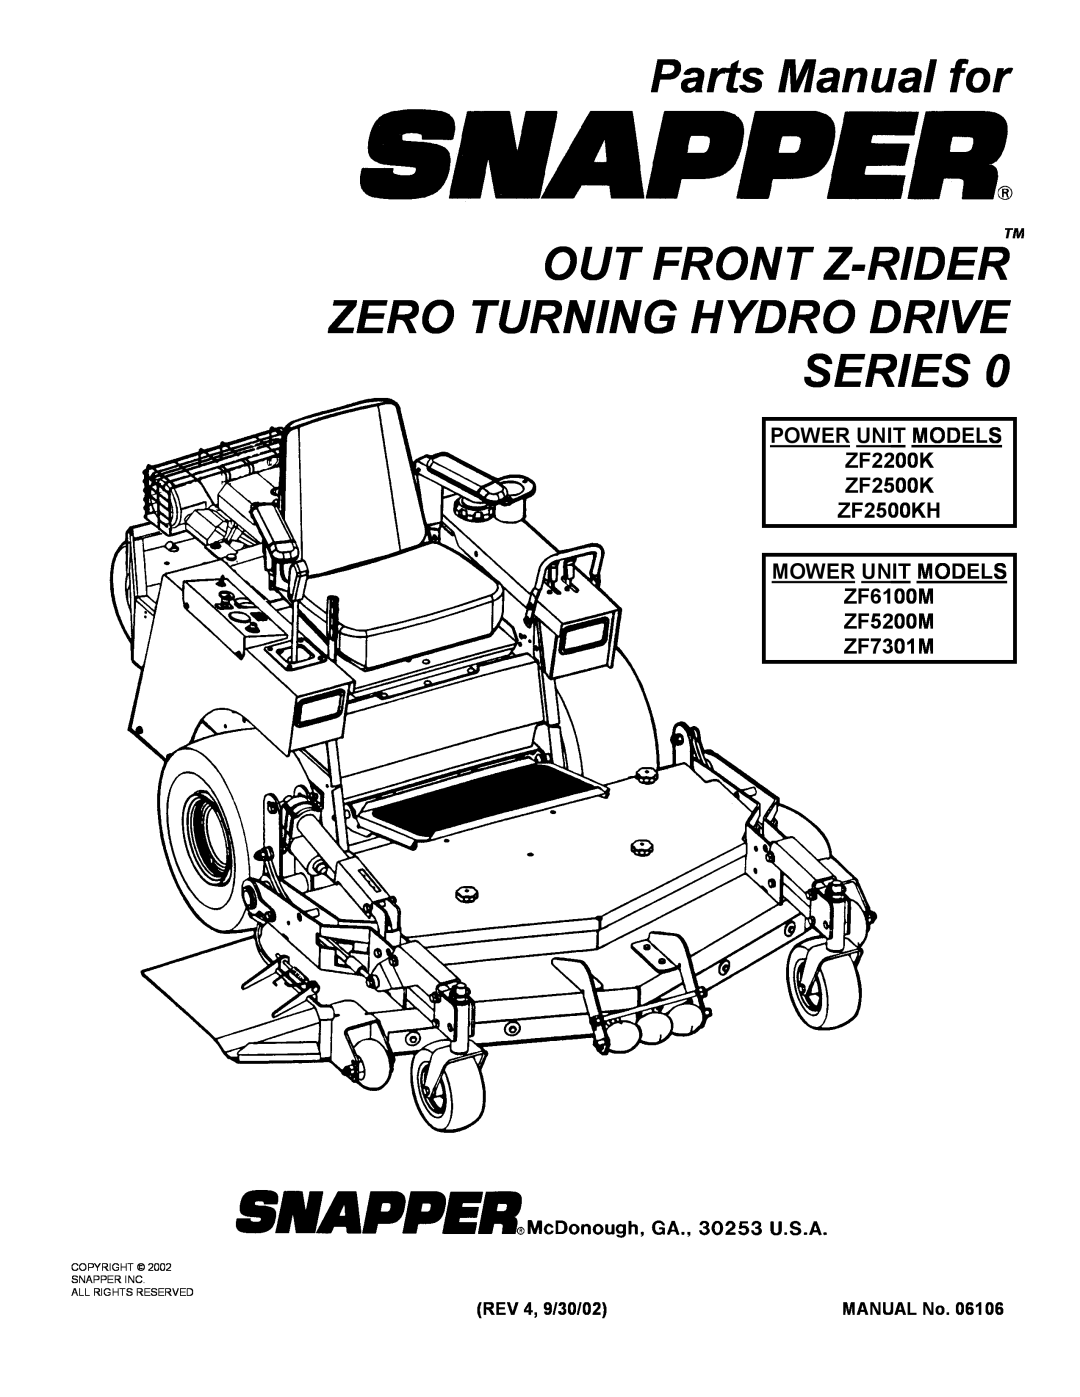 Snapper ZF2500KH, ZF2200K manual Parts Manual for OUT FRONT Z-RIDERTM, Zero Turning Hydro Drive Series 